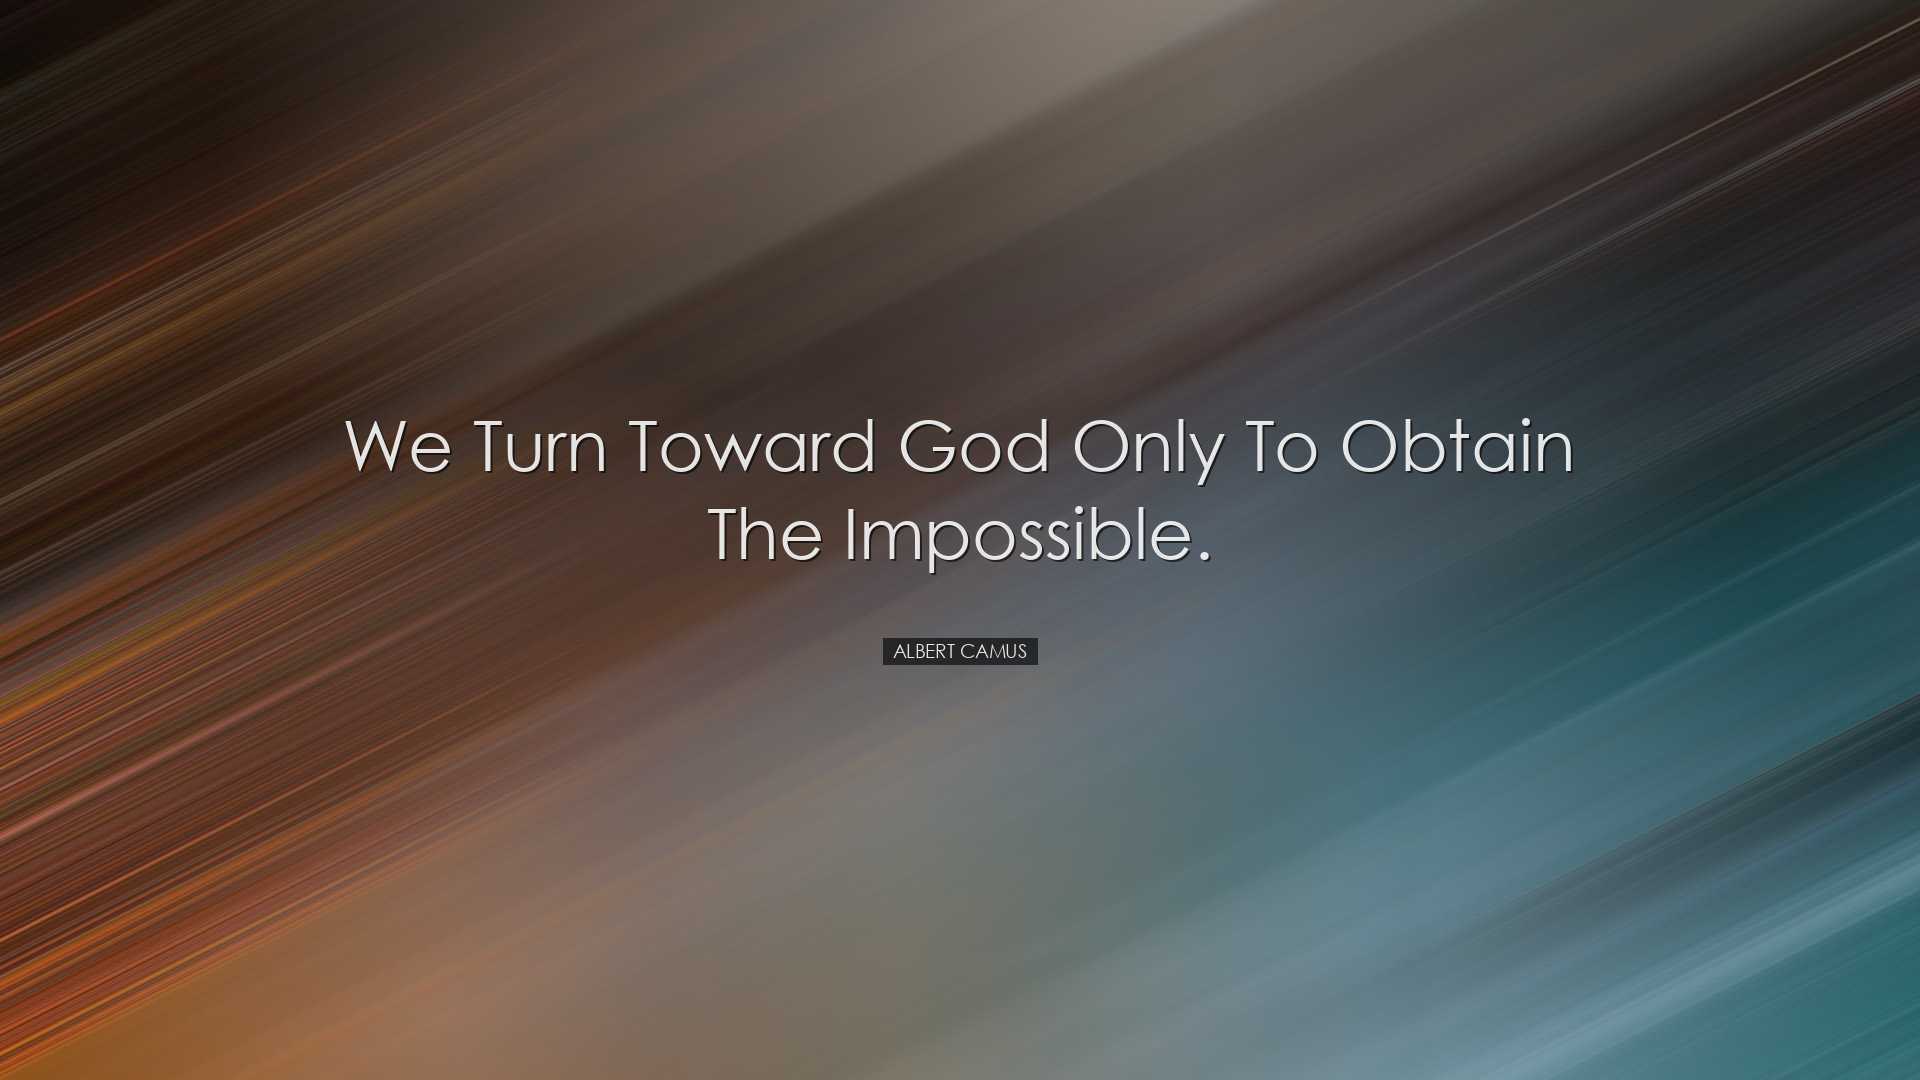 We turn toward God only to obtain the impossible. - Albert Camus